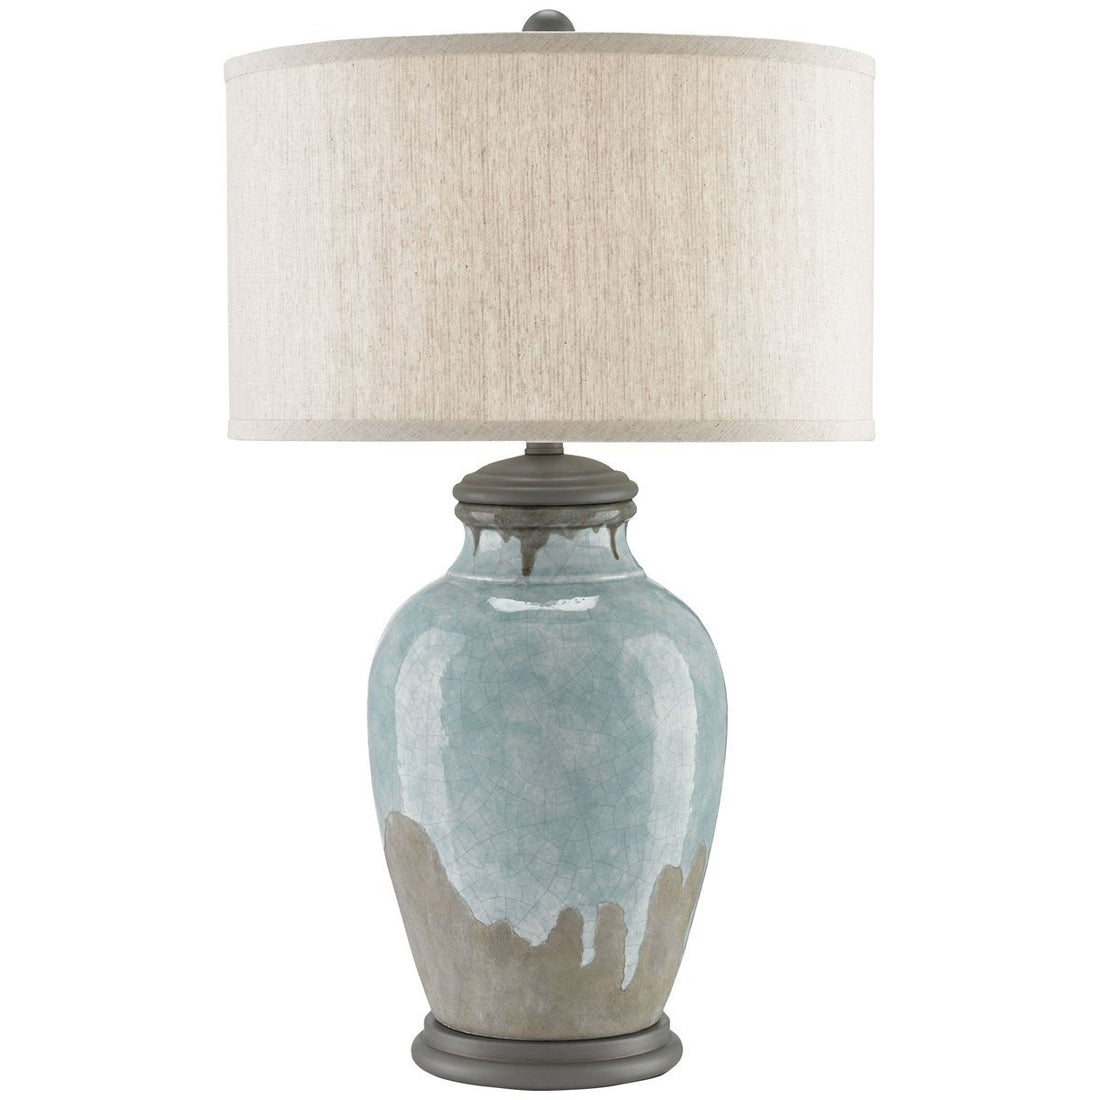 Currey and Company Chatswood Table Lamp